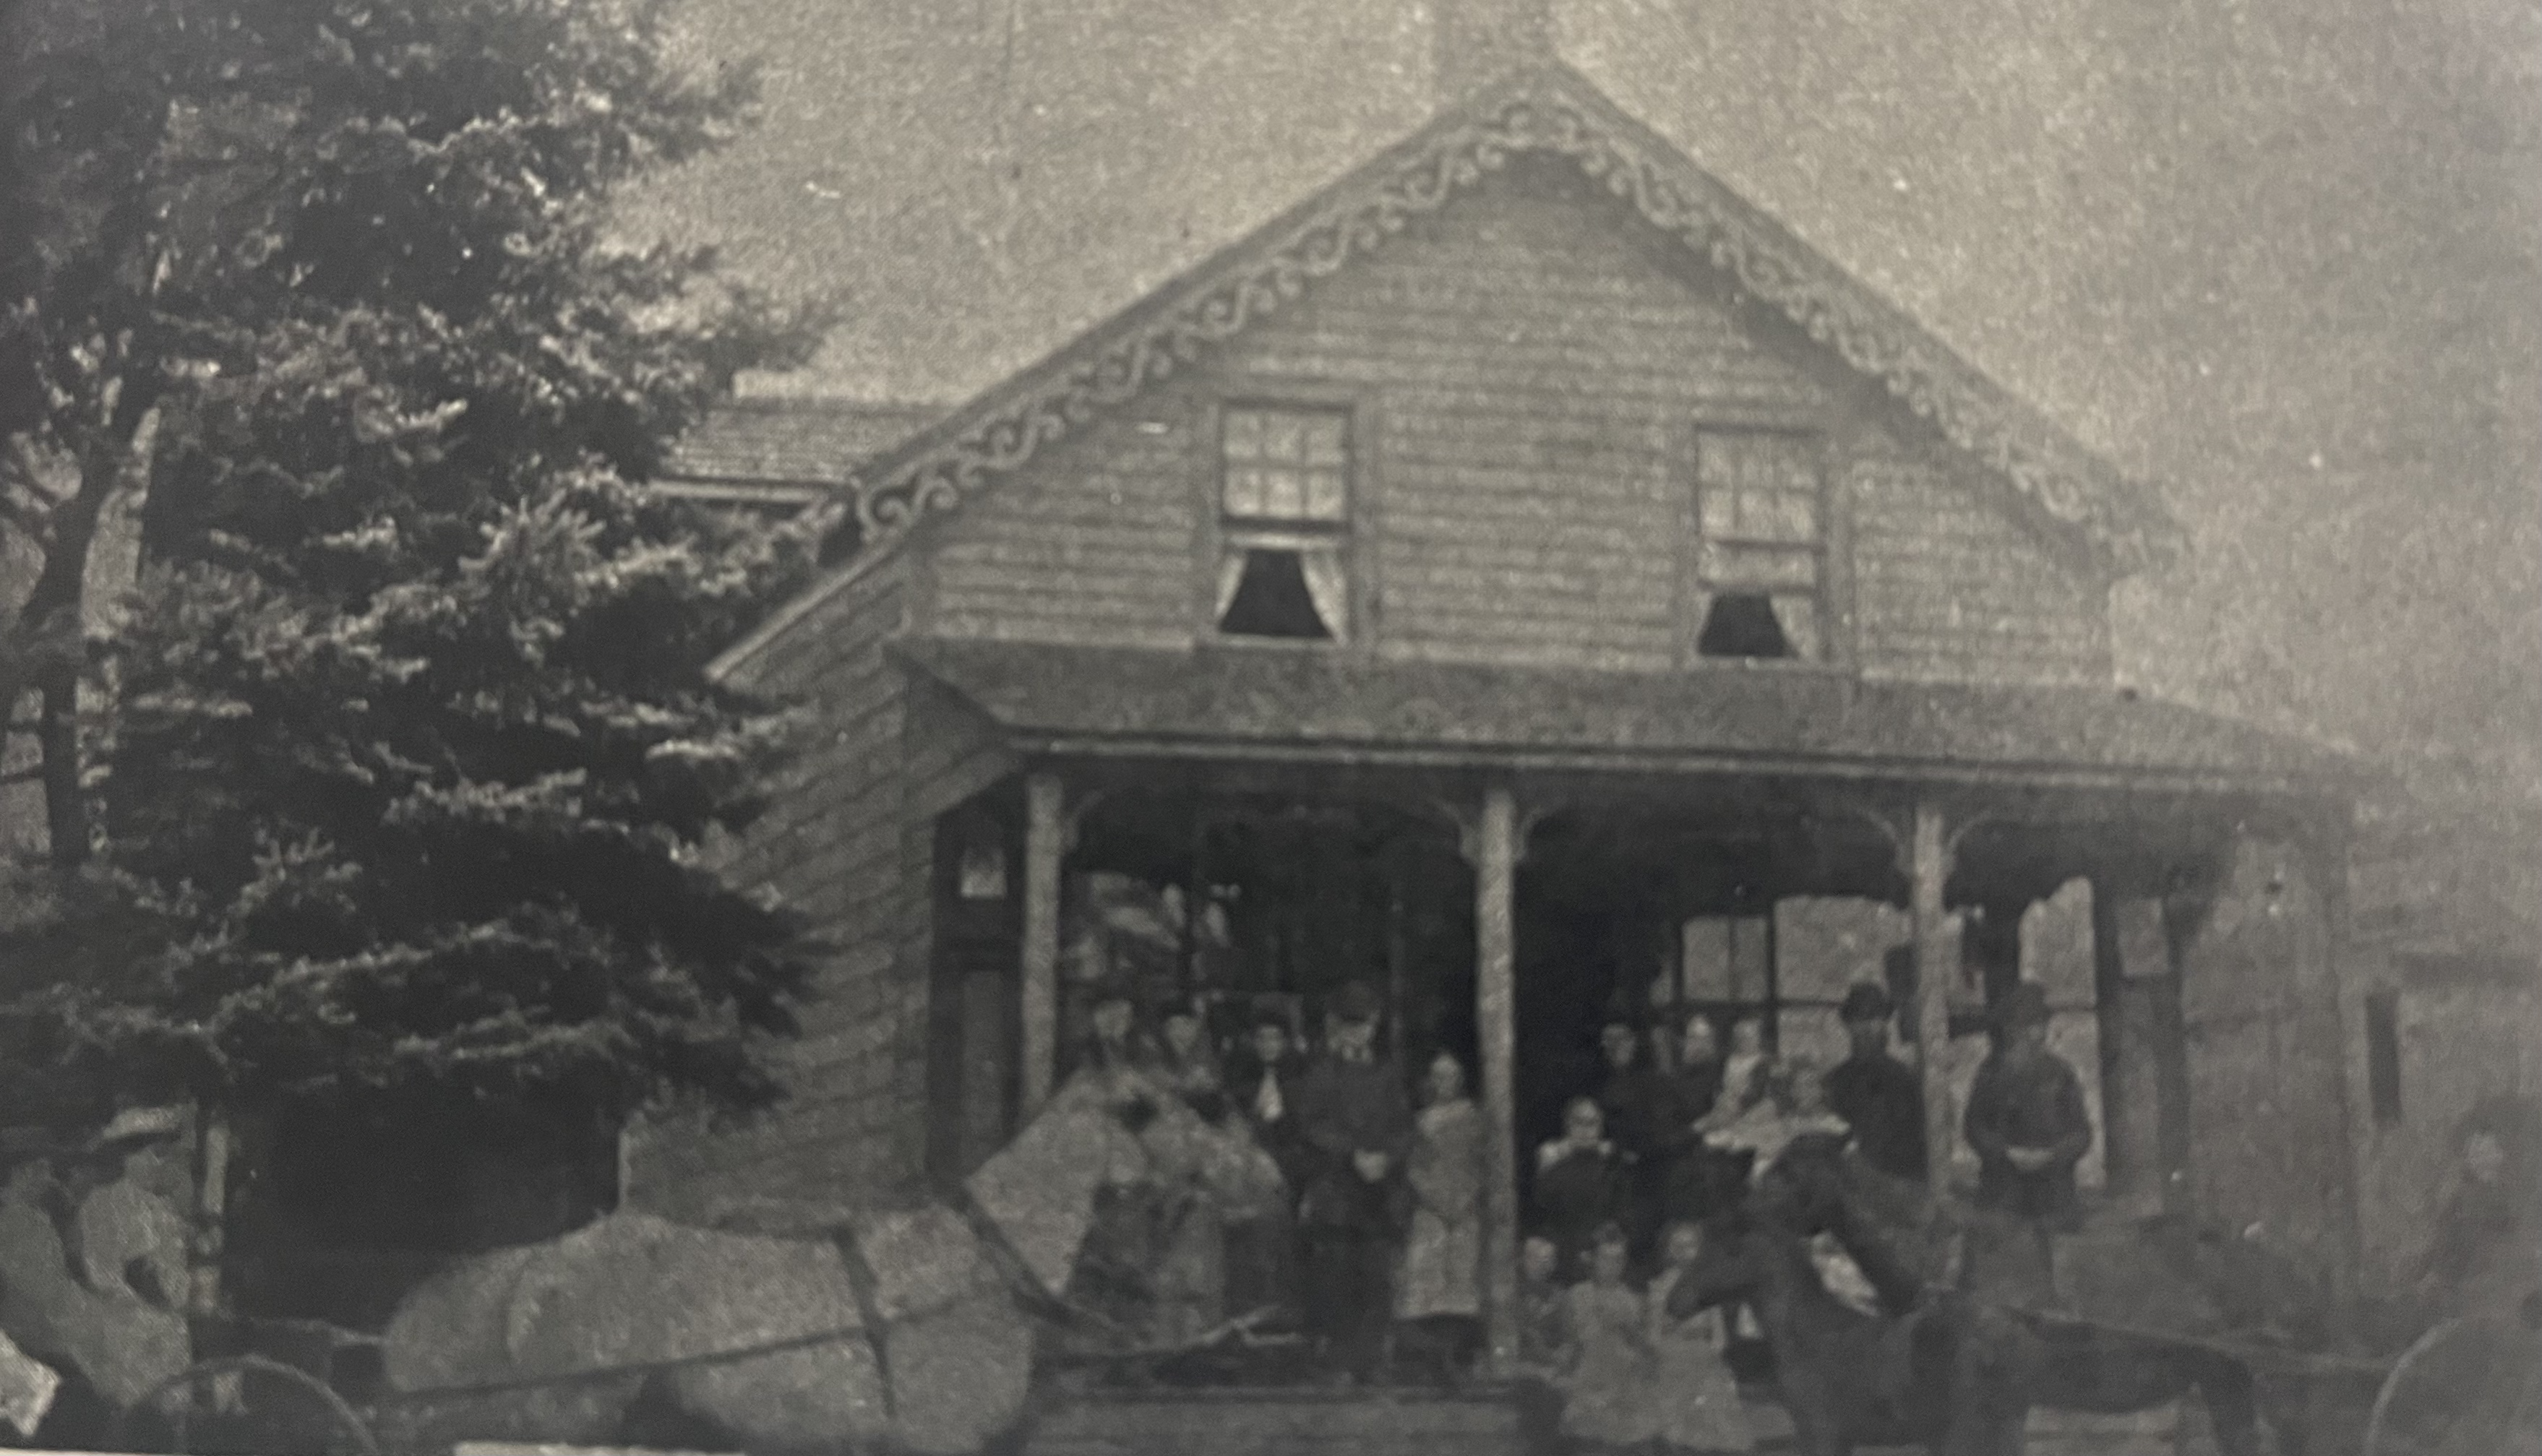 An aged photograph of a community gathering on the porch of an old farm house.